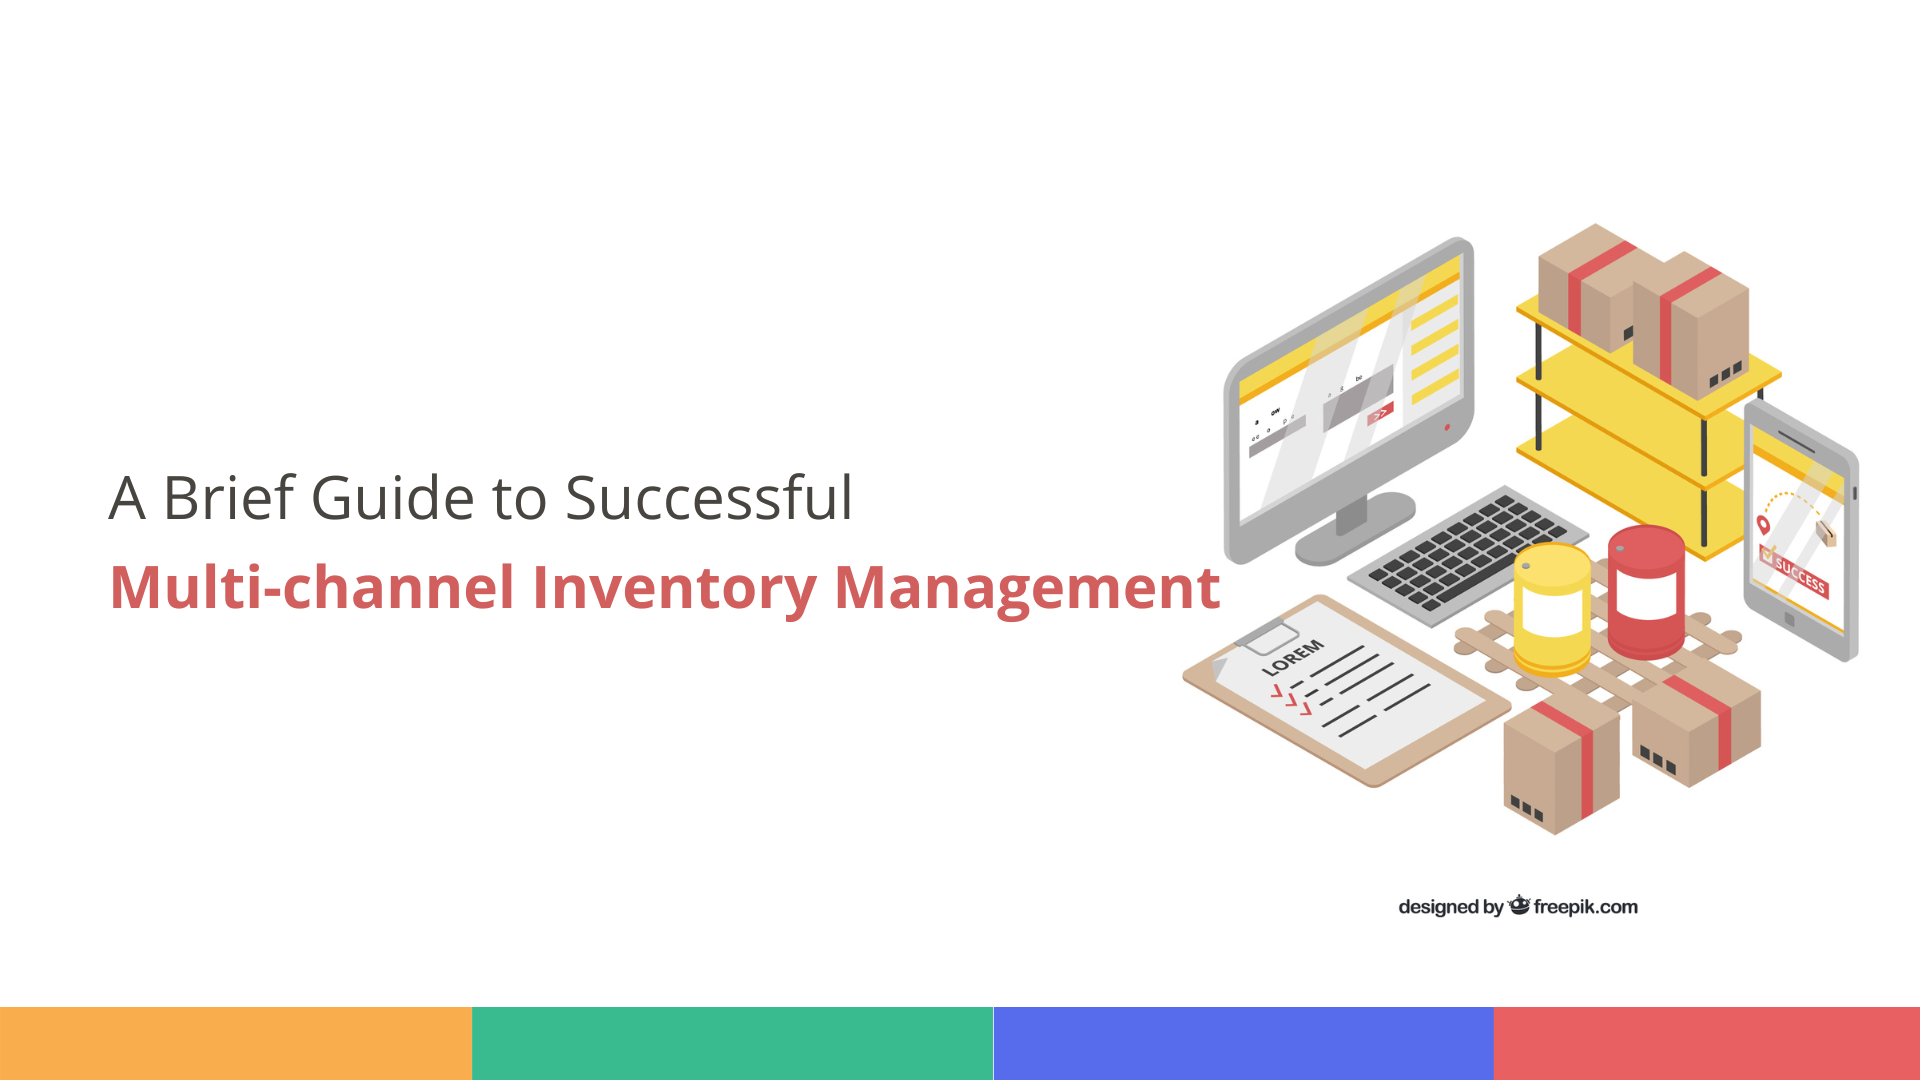 Multi-channel inventory management